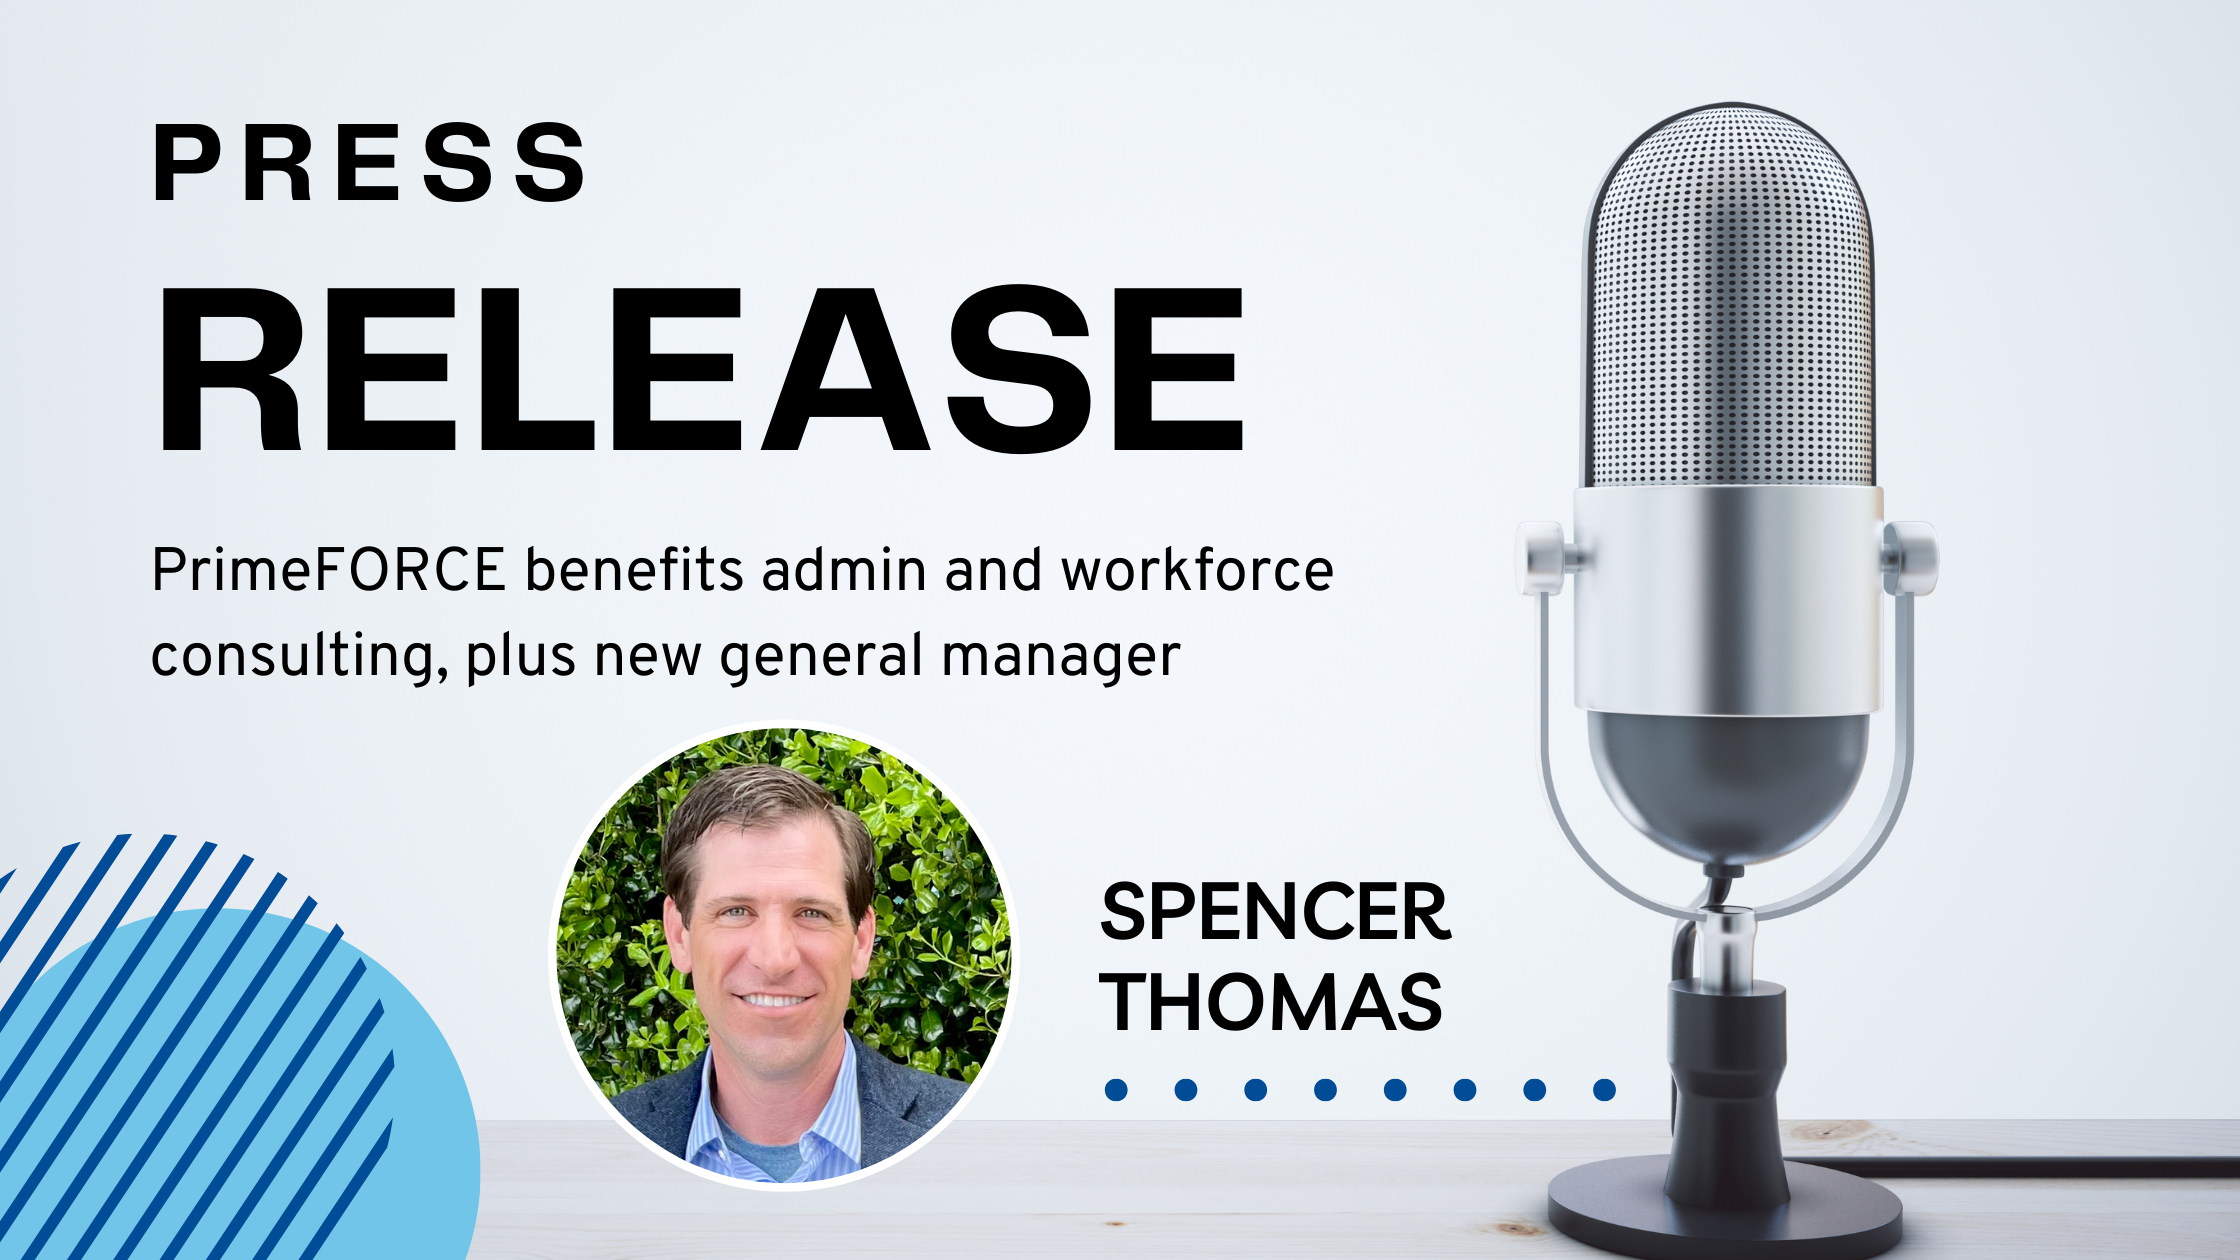 [PR] PrimeFORCE Benefits Software, Workforce Consulting and General Manager Spencer Thomas